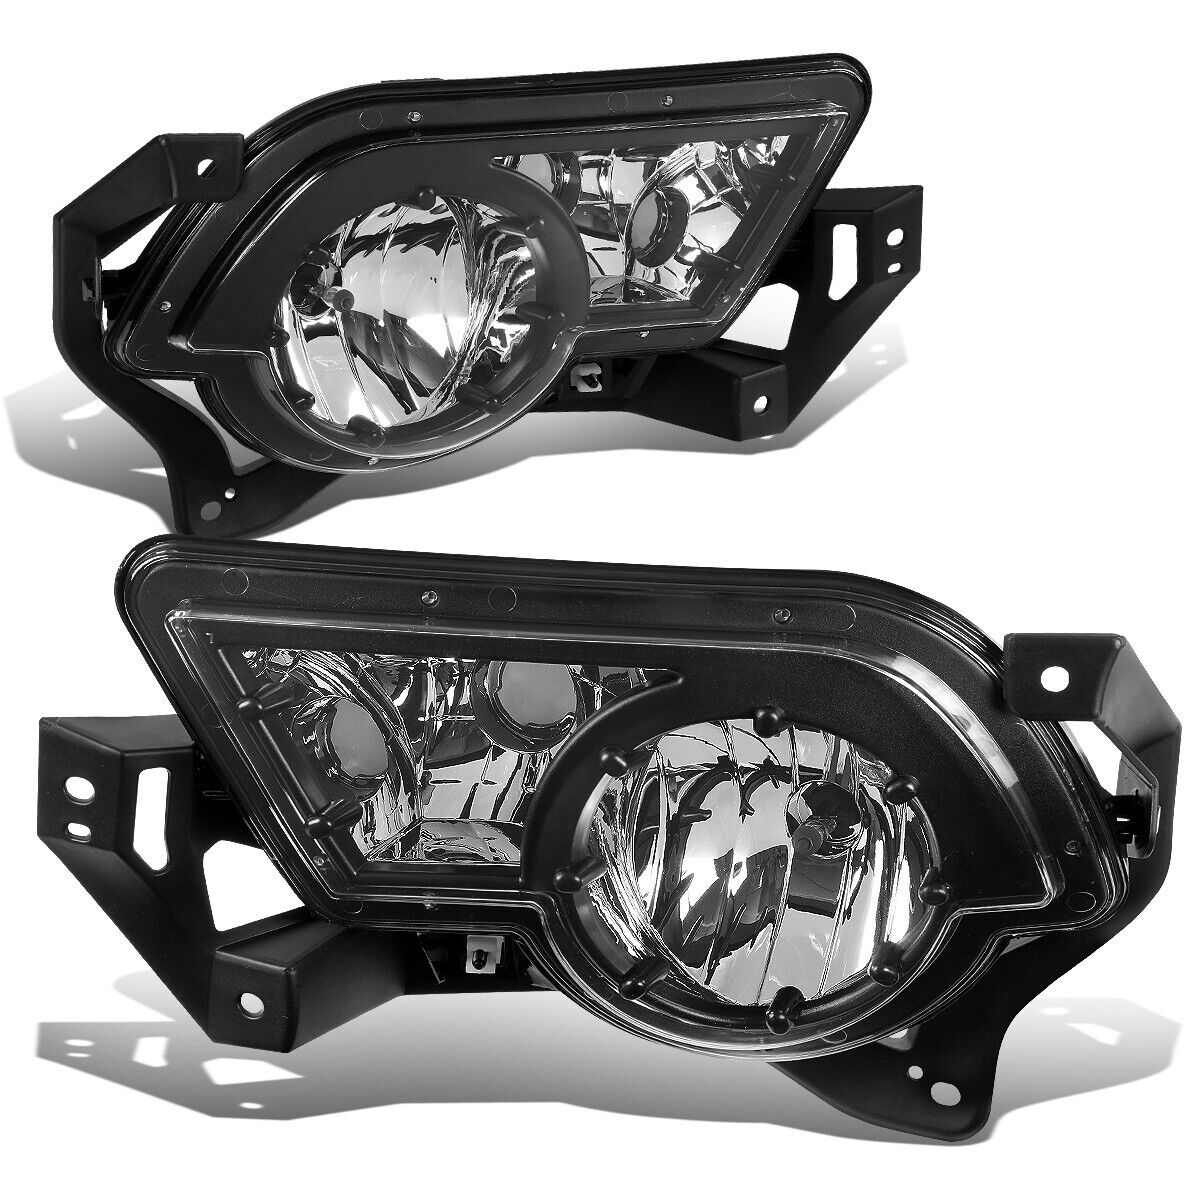 Fog Lights Fit For Chevy Avalanche 1500 2002-2006 W/Body Cladding and Brackets